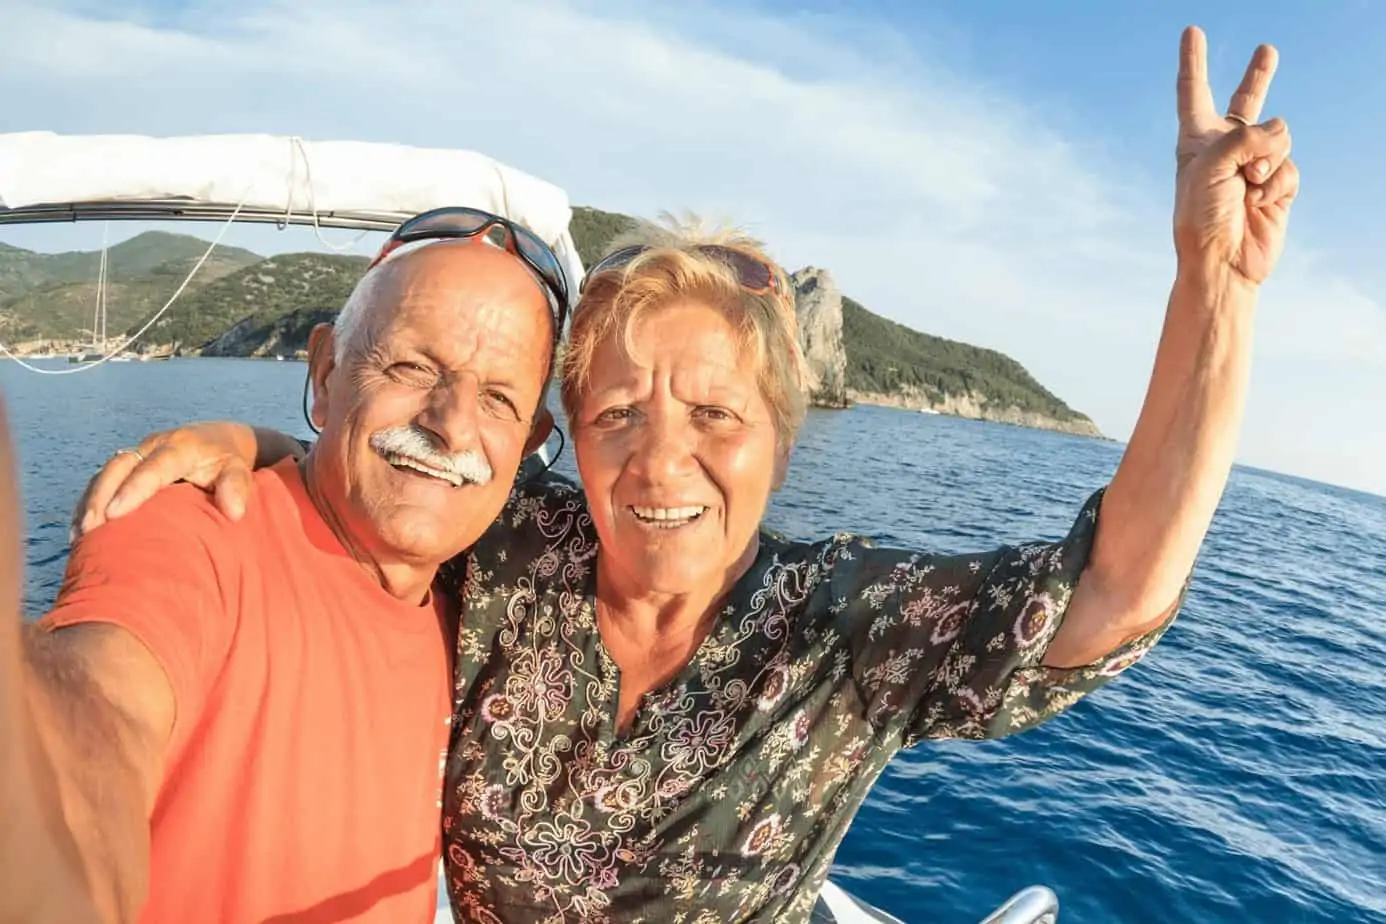 a selfie photo of a senior couple while riding a boat